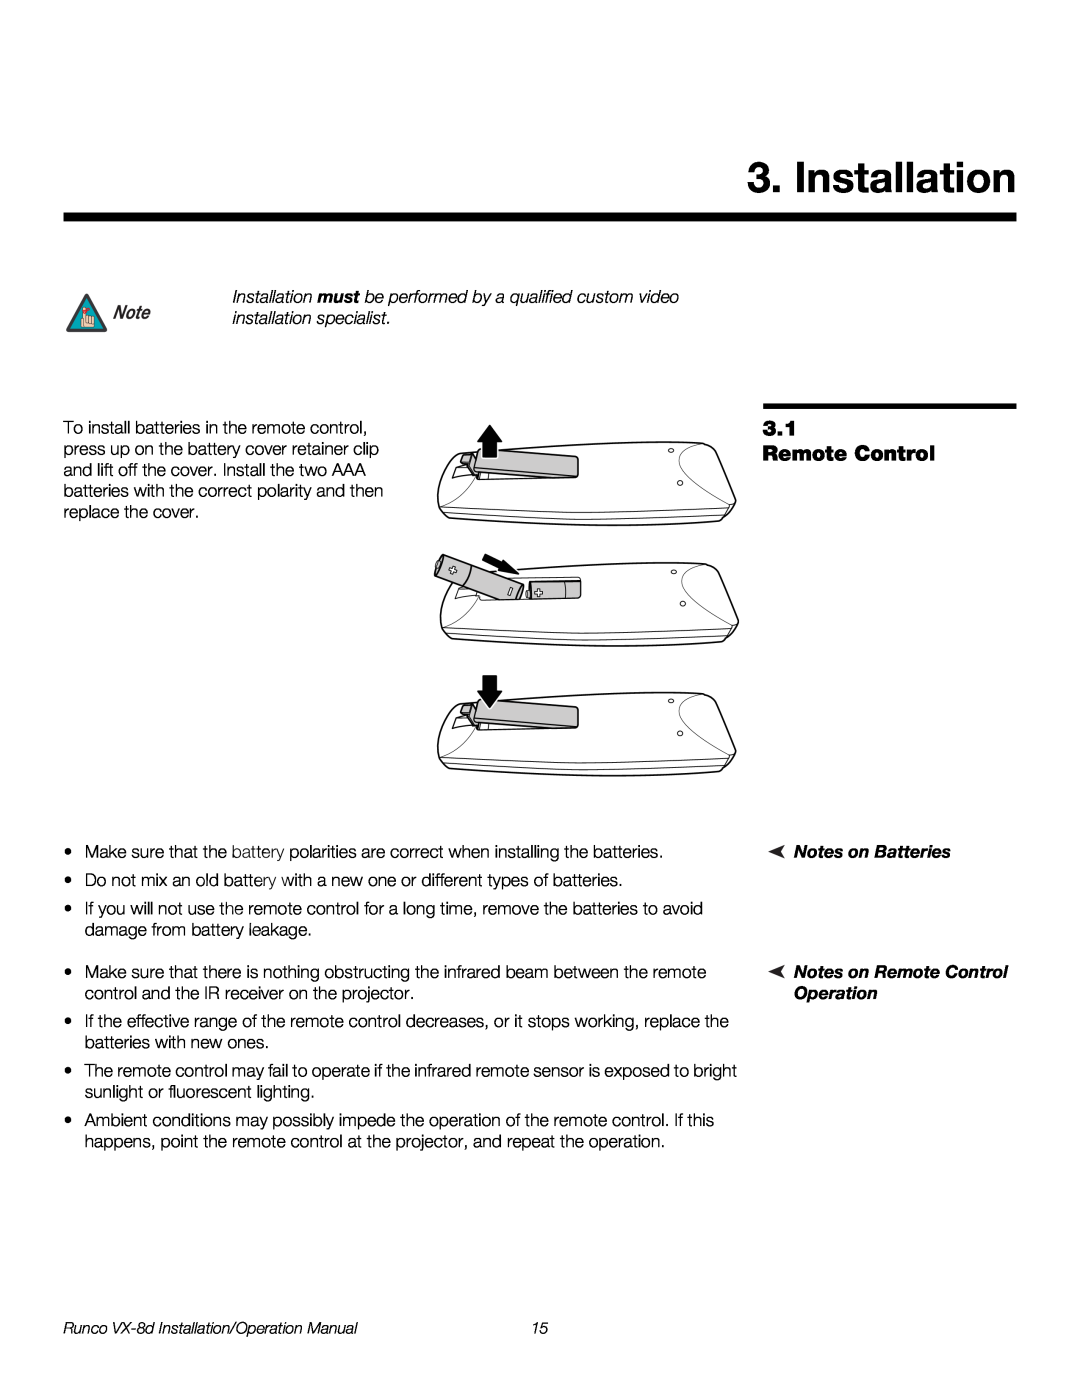 Runco VX-8D Installation, installation specialist, Notes on Batteries Notes on Remote Control Operation 